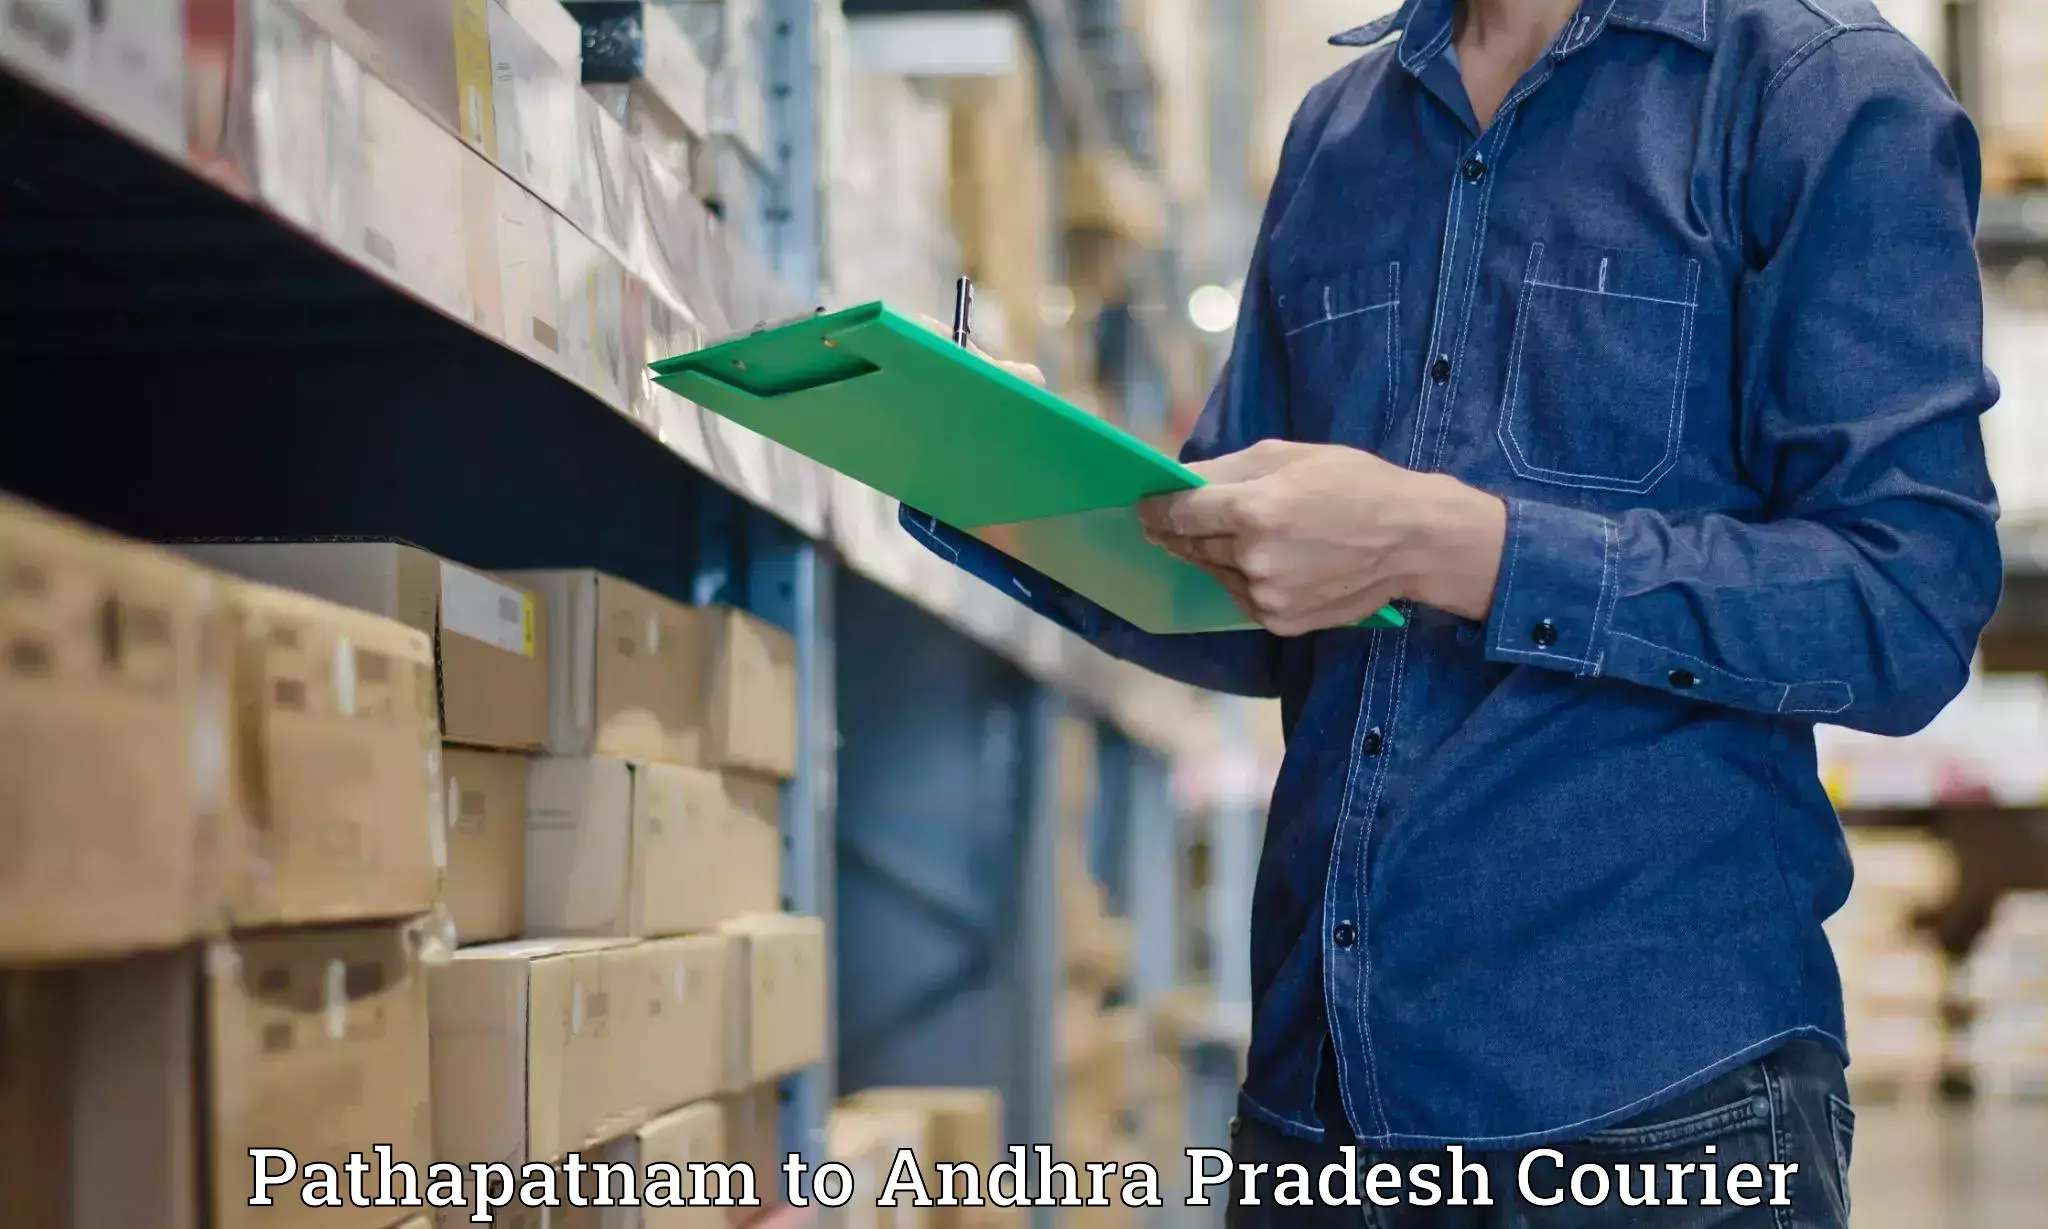 International courier networks Pathapatnam to Andhra Pradesh